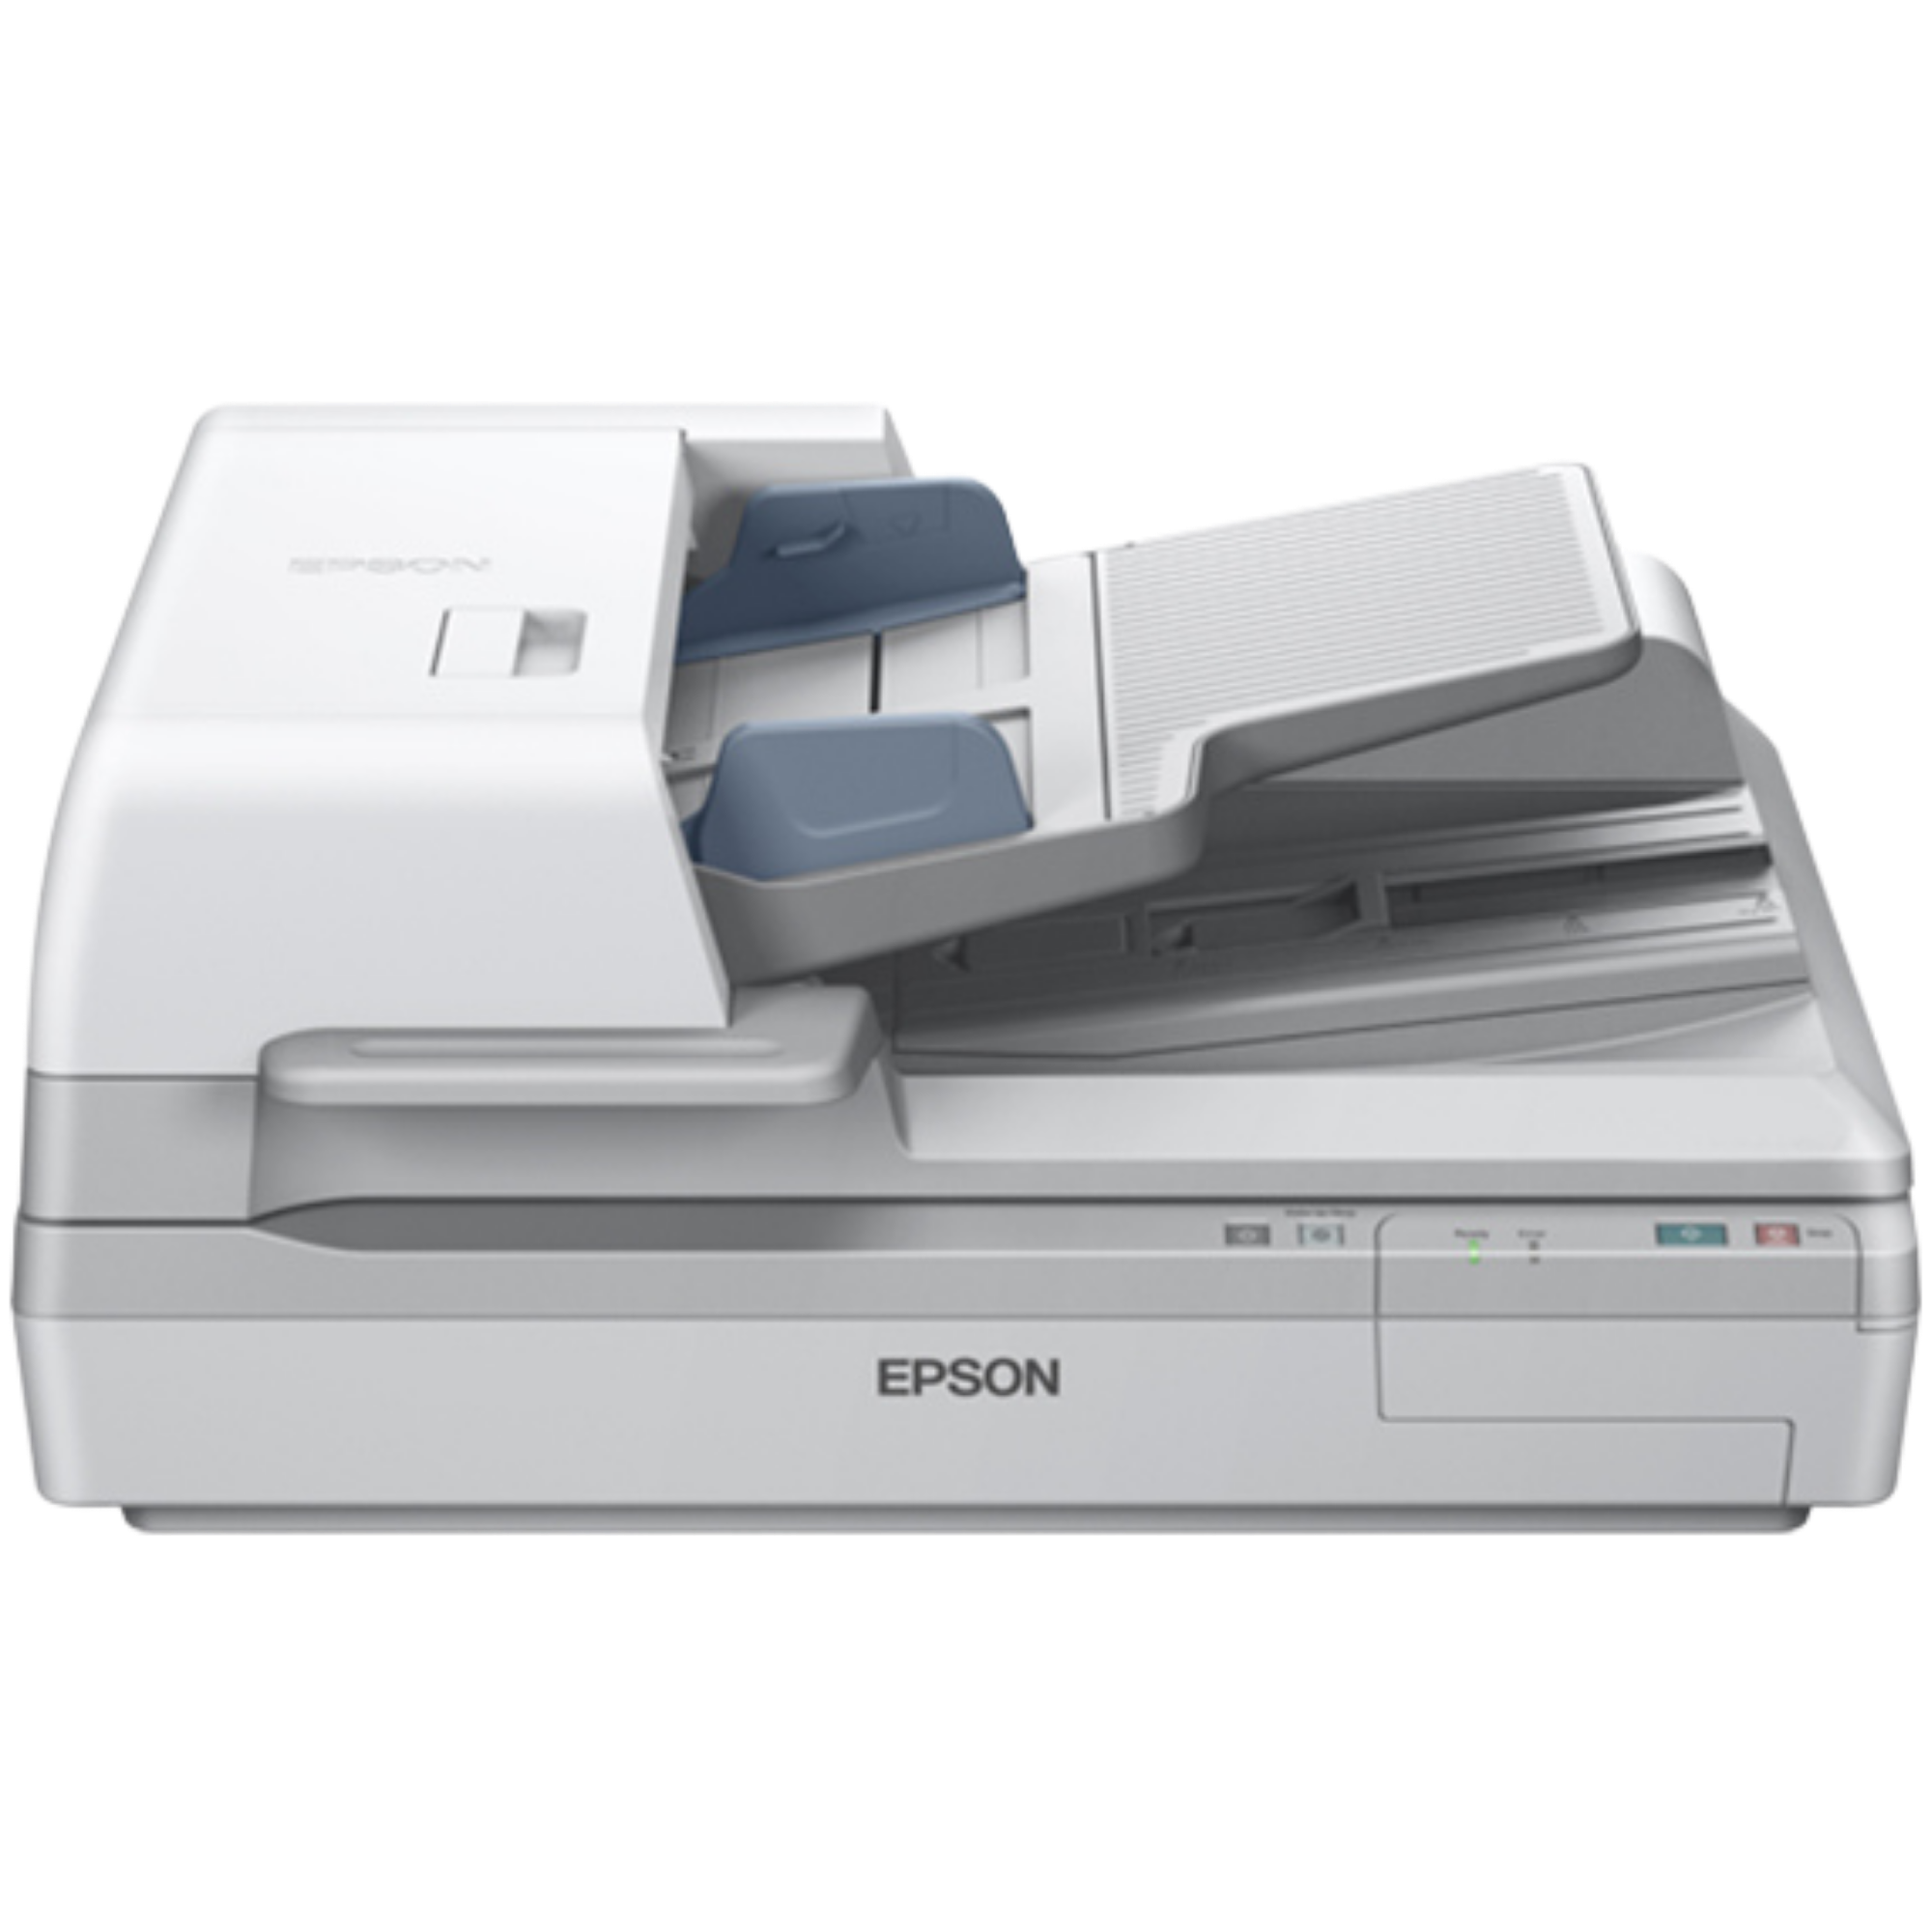 Flatbed Scanner Document Feeder - Compare features, user reviews 